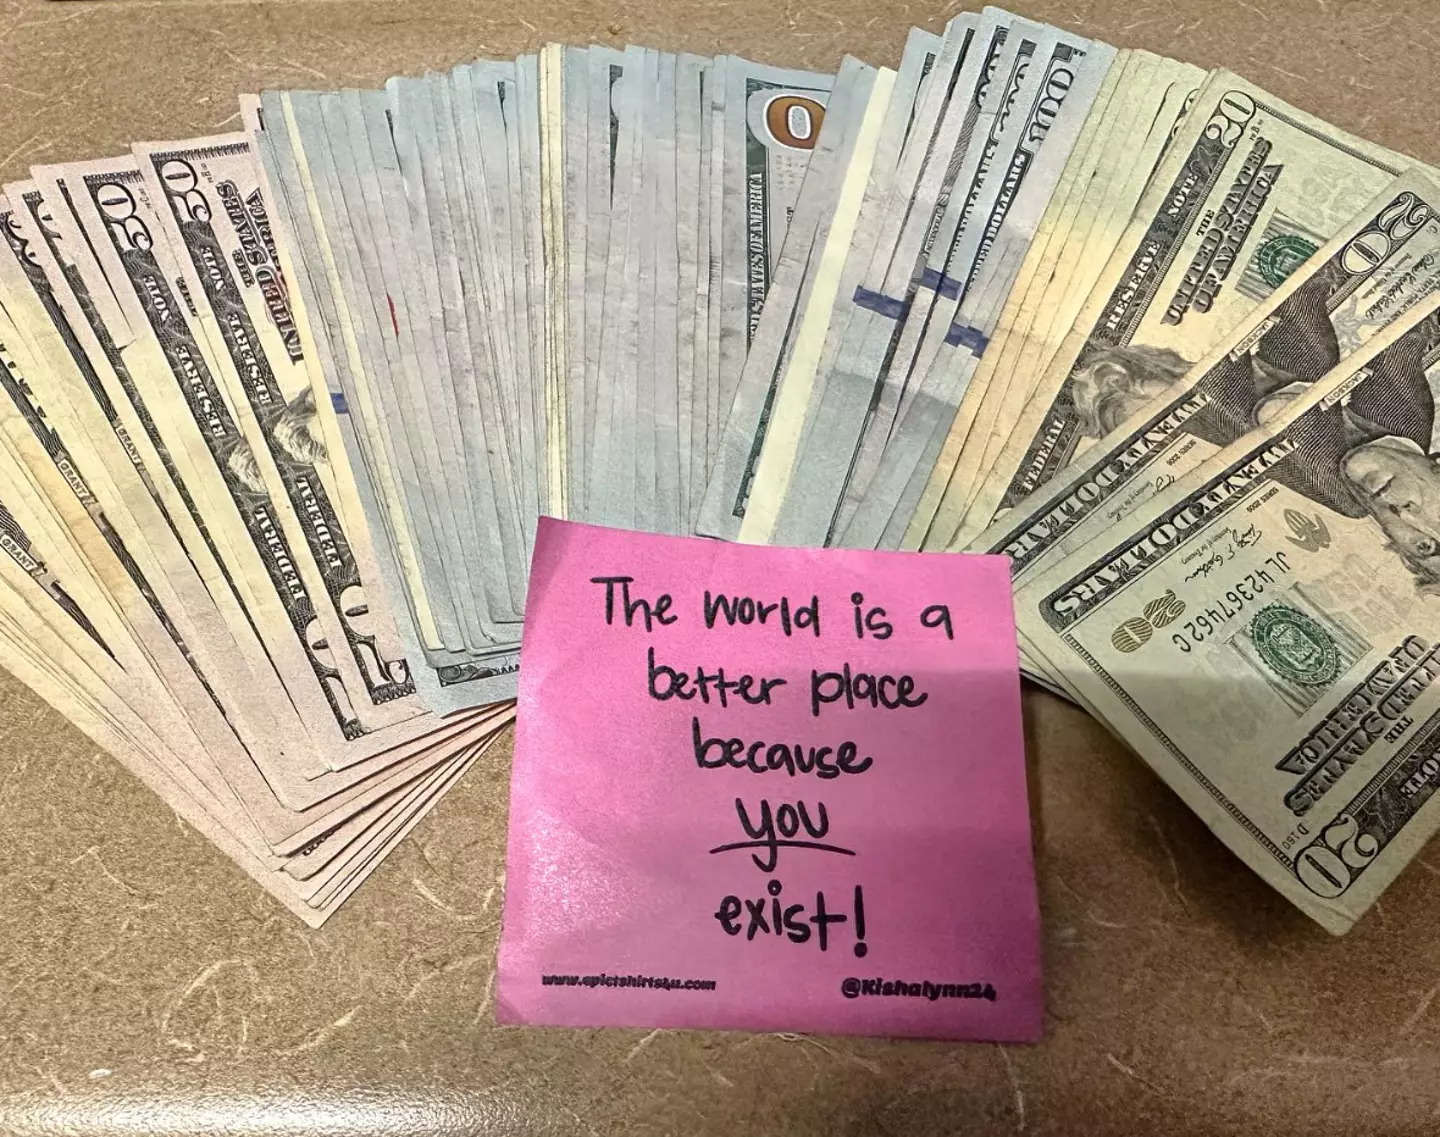 The restaurant received a massive $10,000 tip.